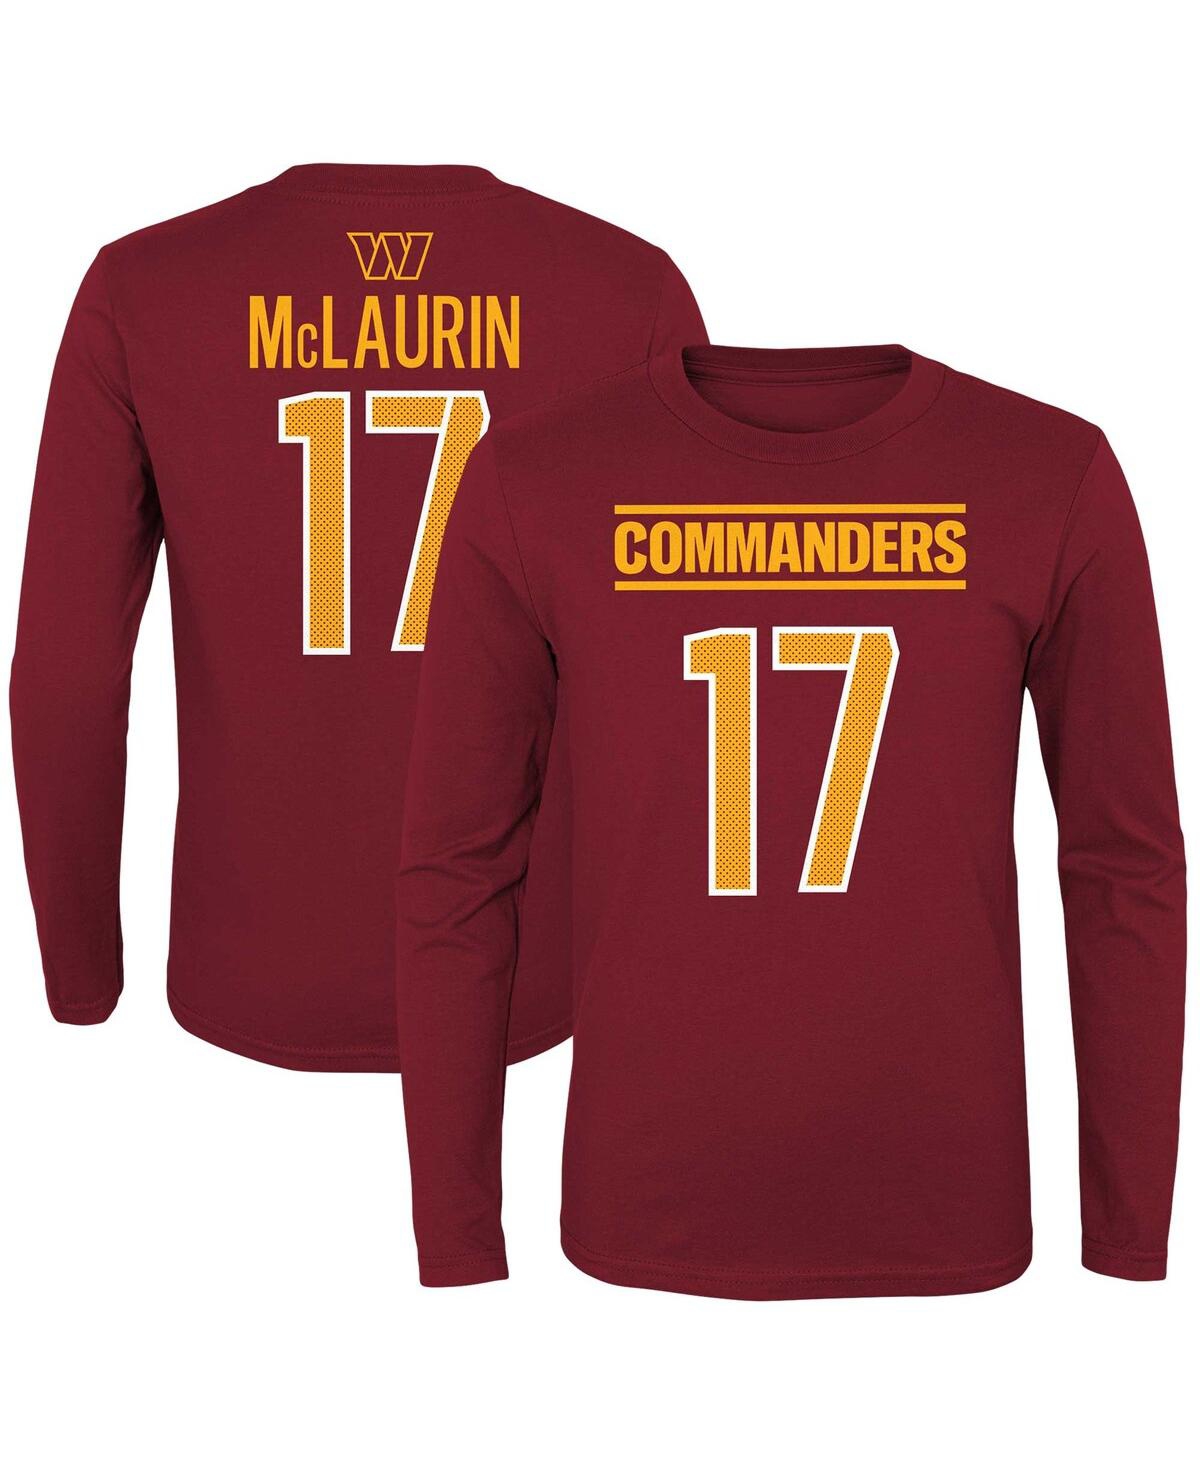 Shop Outerstuff Big Boys Terry Mclaurin Burgundy Washington Commanders Mainliner Player Name And Number Long Sleeve 